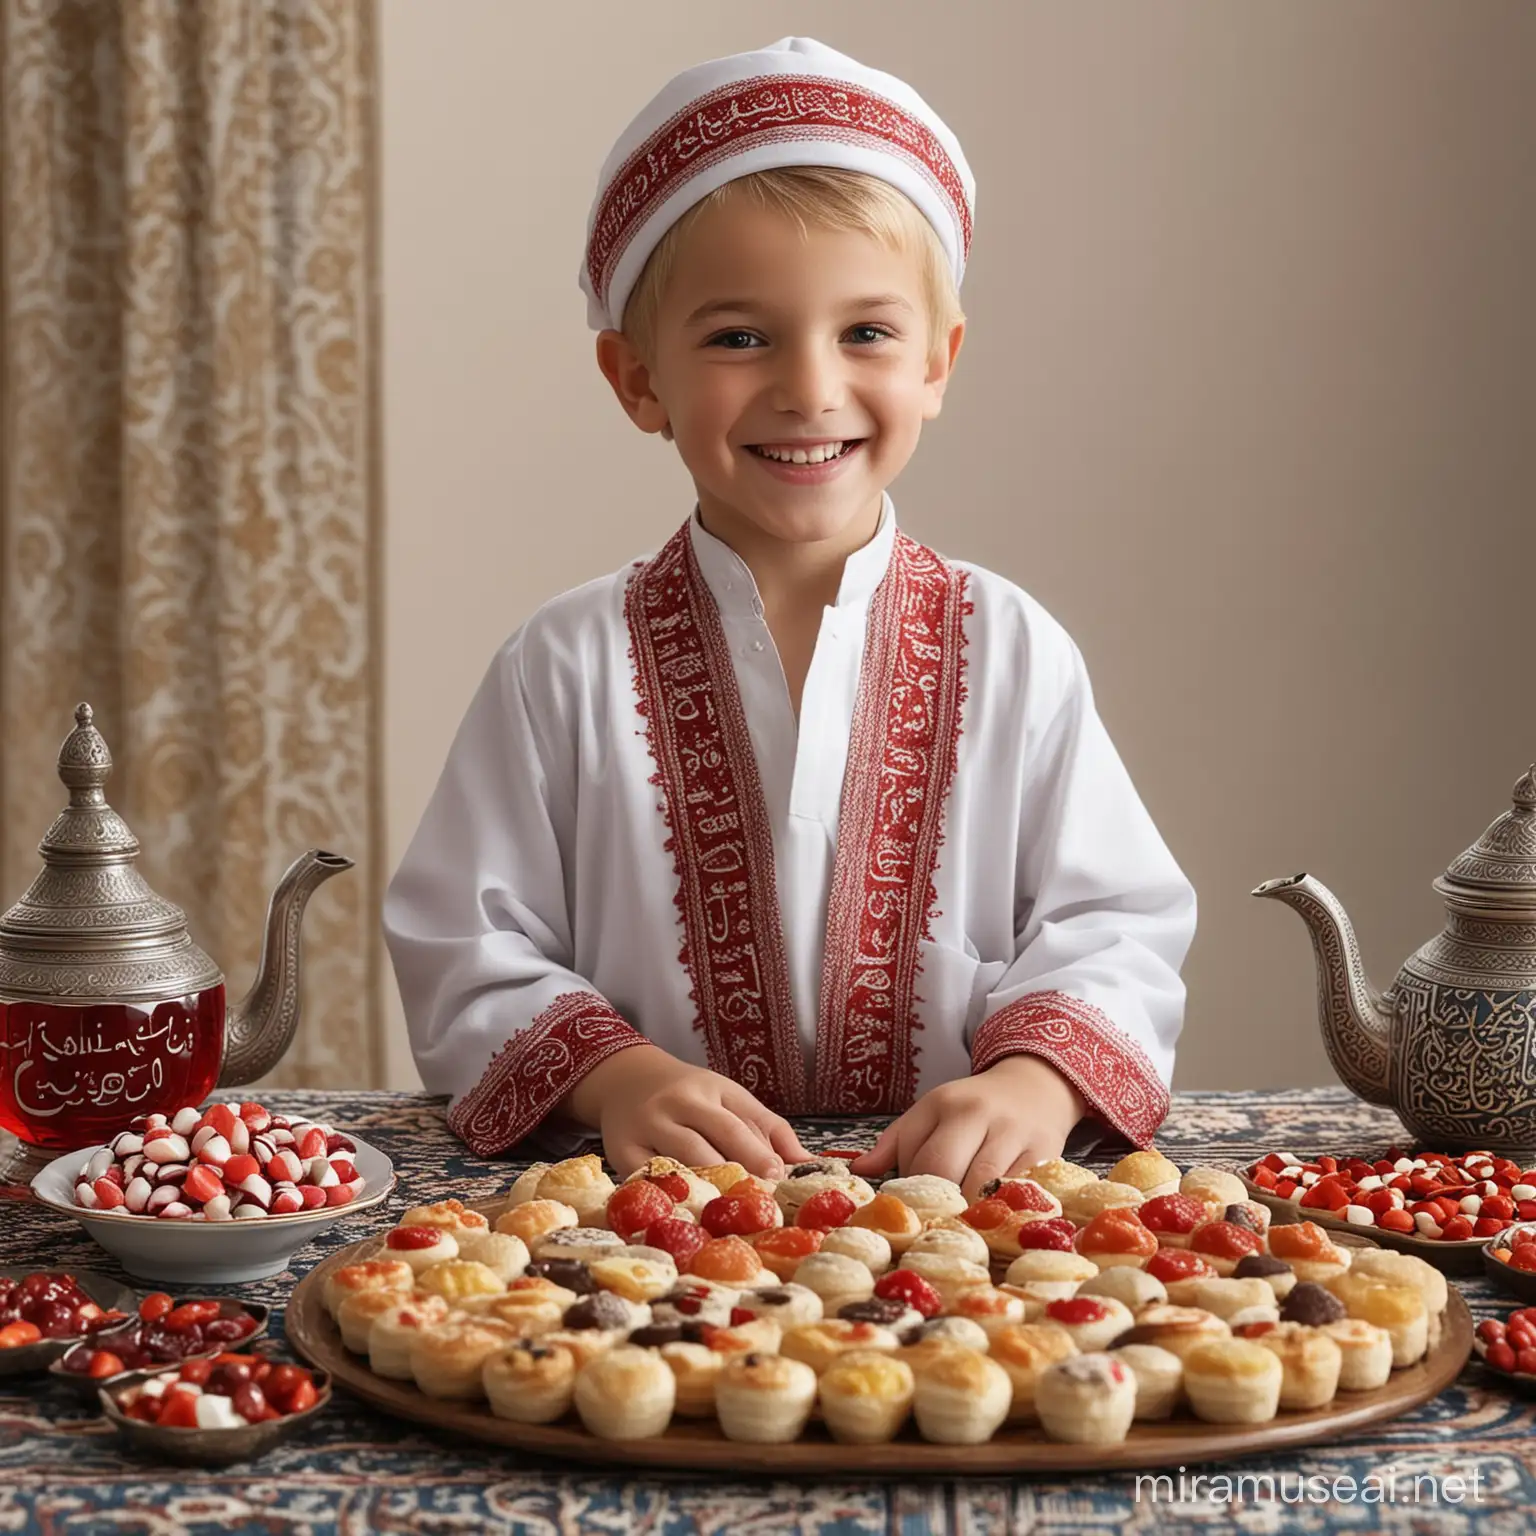 Young French Boy Celebrating Eid alFitr with Sweets and Smiles